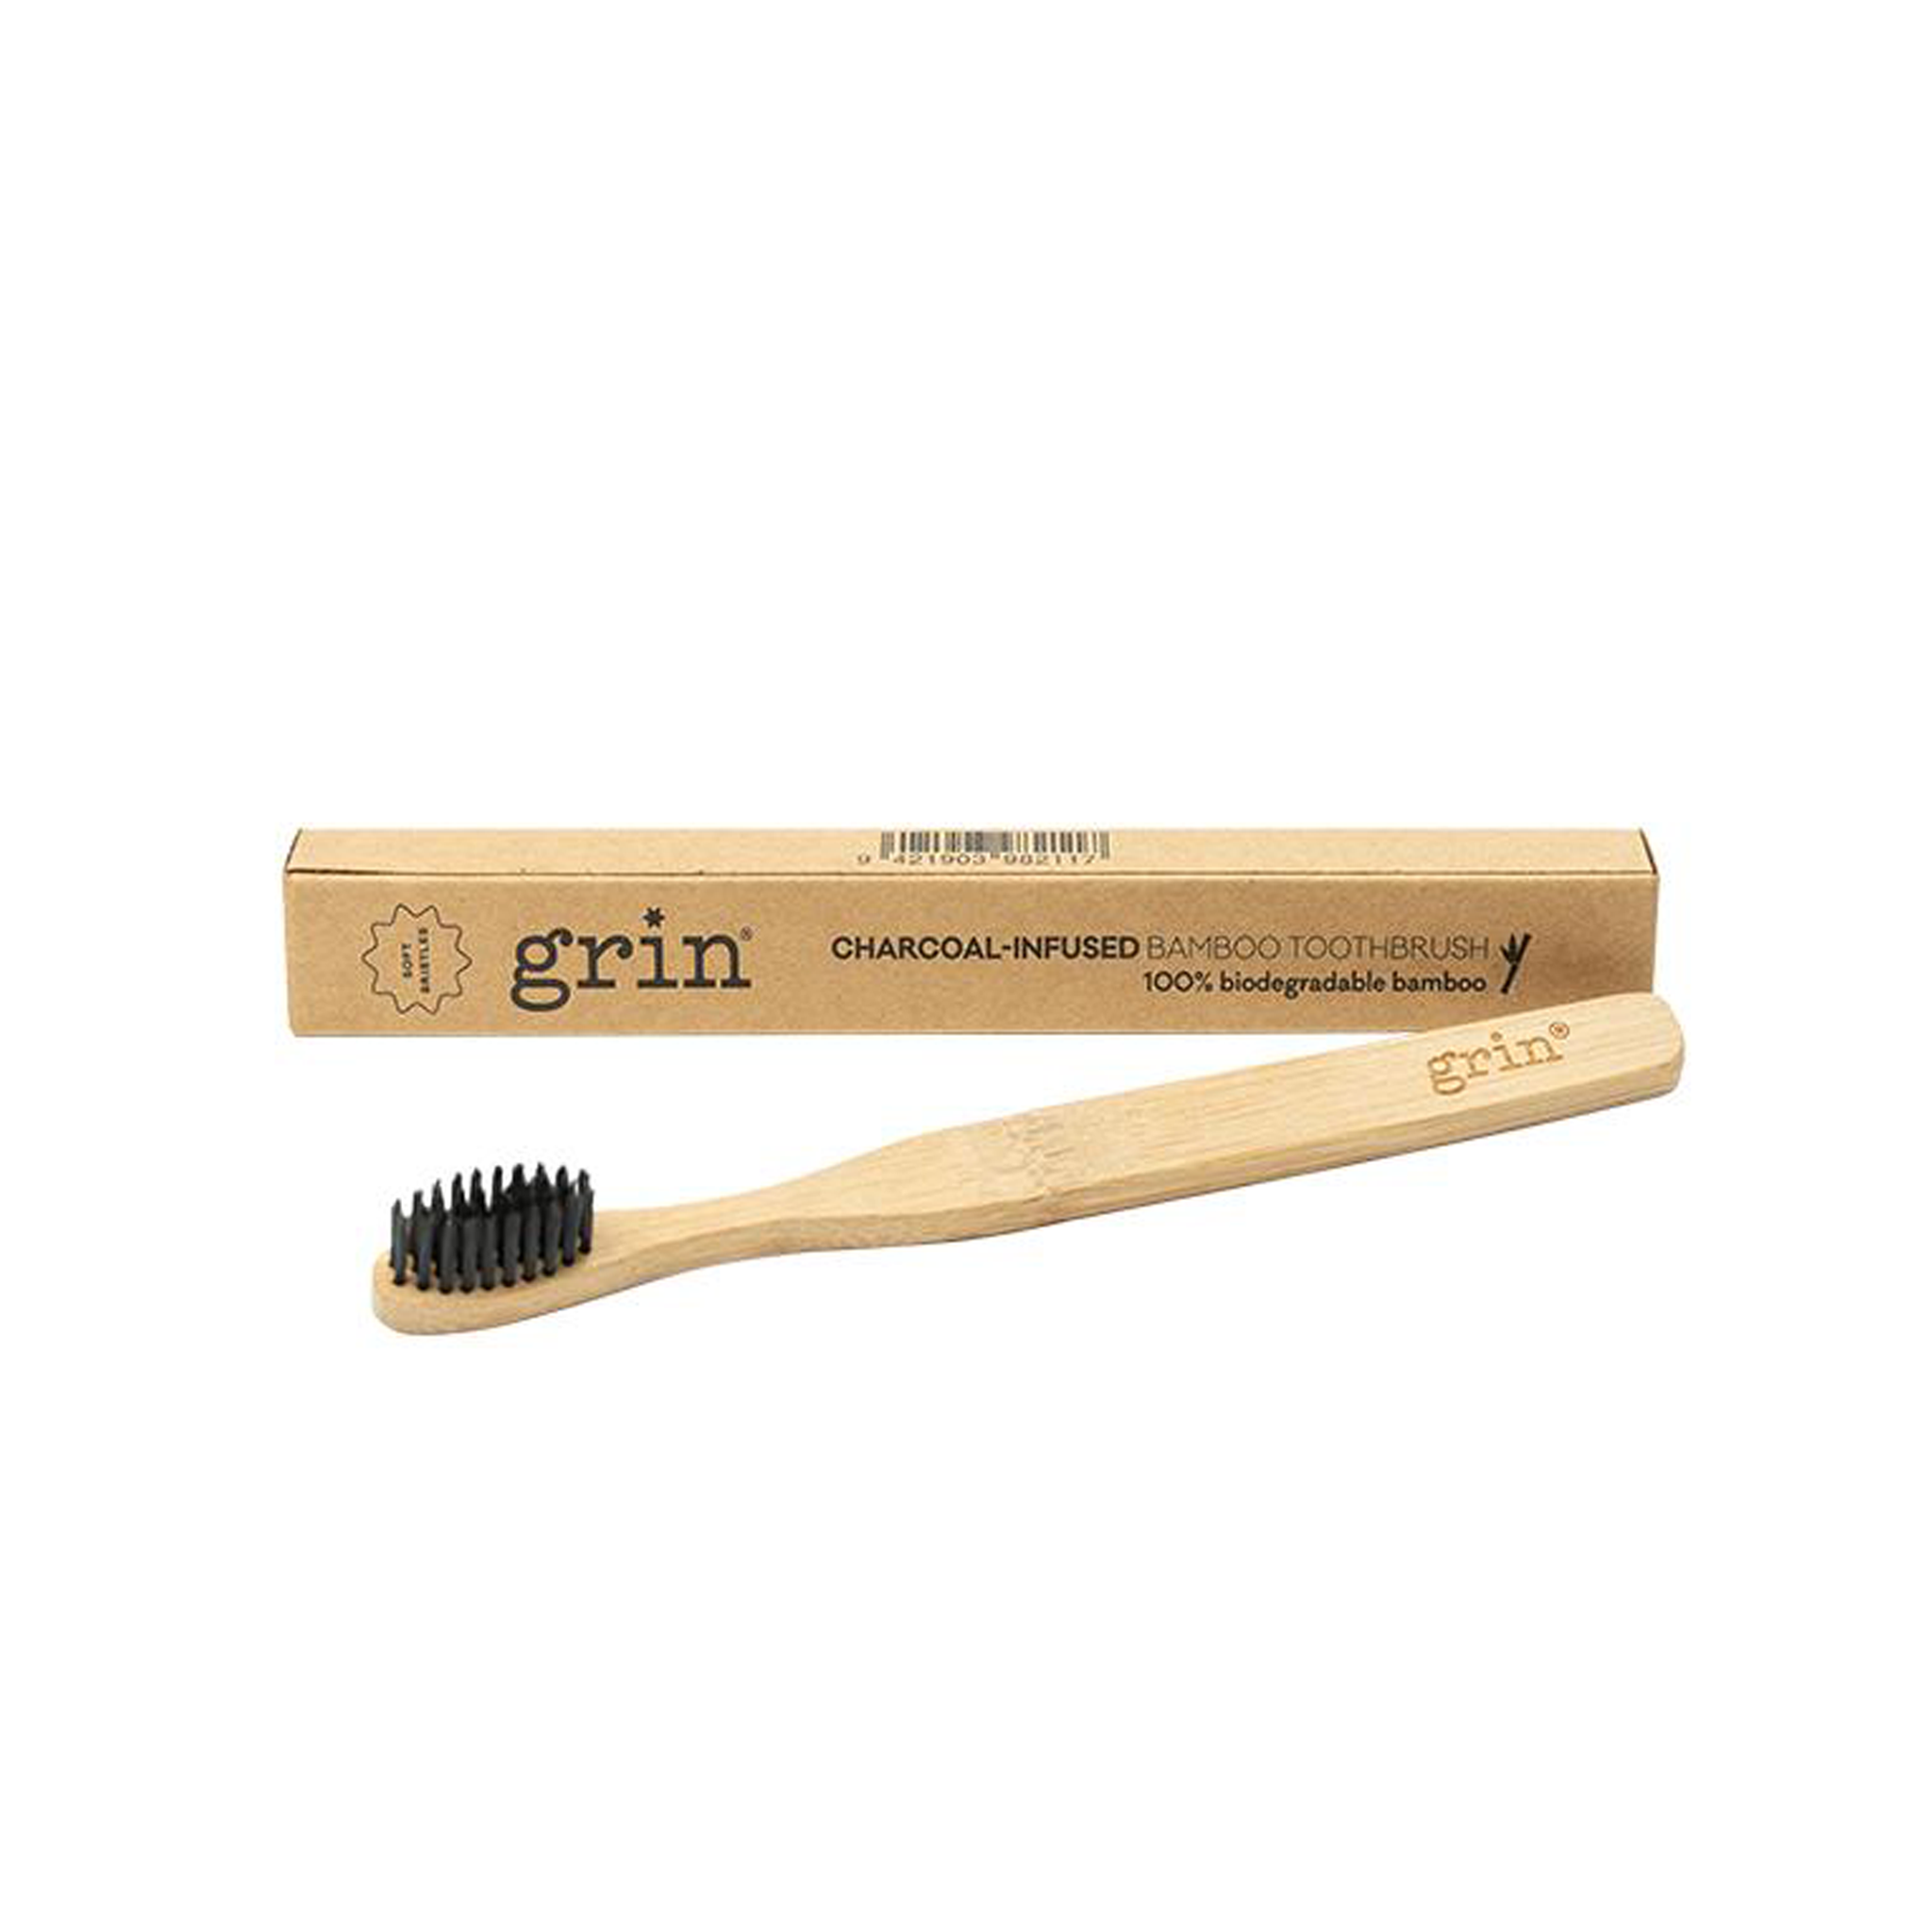 Grin Charcoal Infused Bamboo Toothbrush